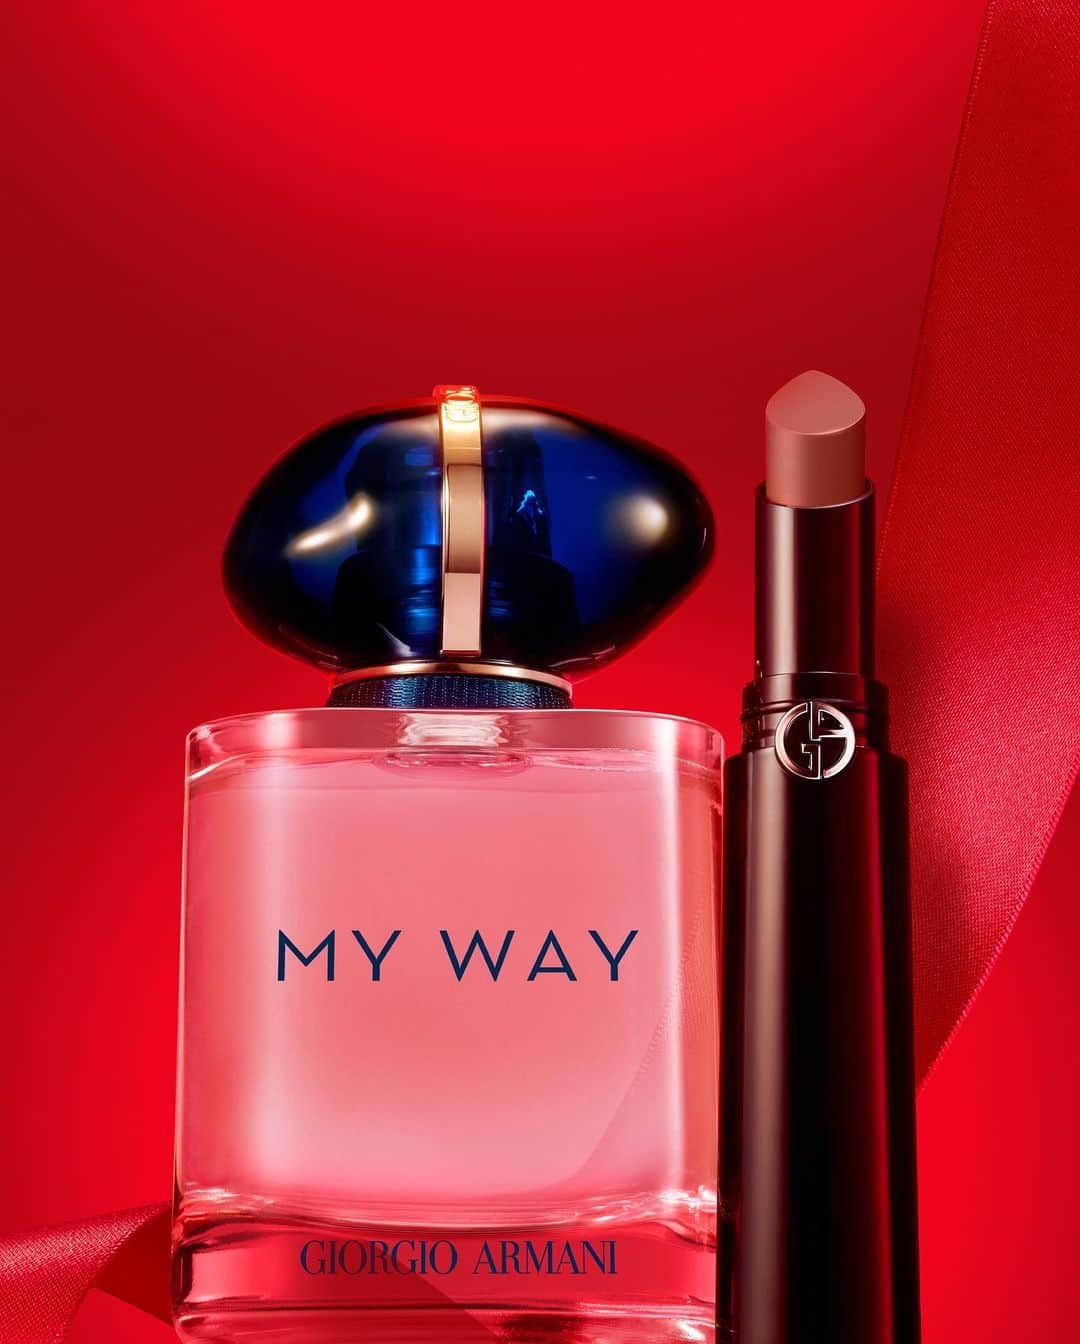 Armani Beautyのインスタグラム：「Gifts for her. With the feminine floral notes of MY WAY EAU DE PARFUM and the high-pigmented color of LIP POWER, find the perfect gift for that special someone this Holiday Season.   #Armanibeauty #ArmaniGift #ArmaniLipPower #MyWay #IAmWhatILive #HolidayGift」